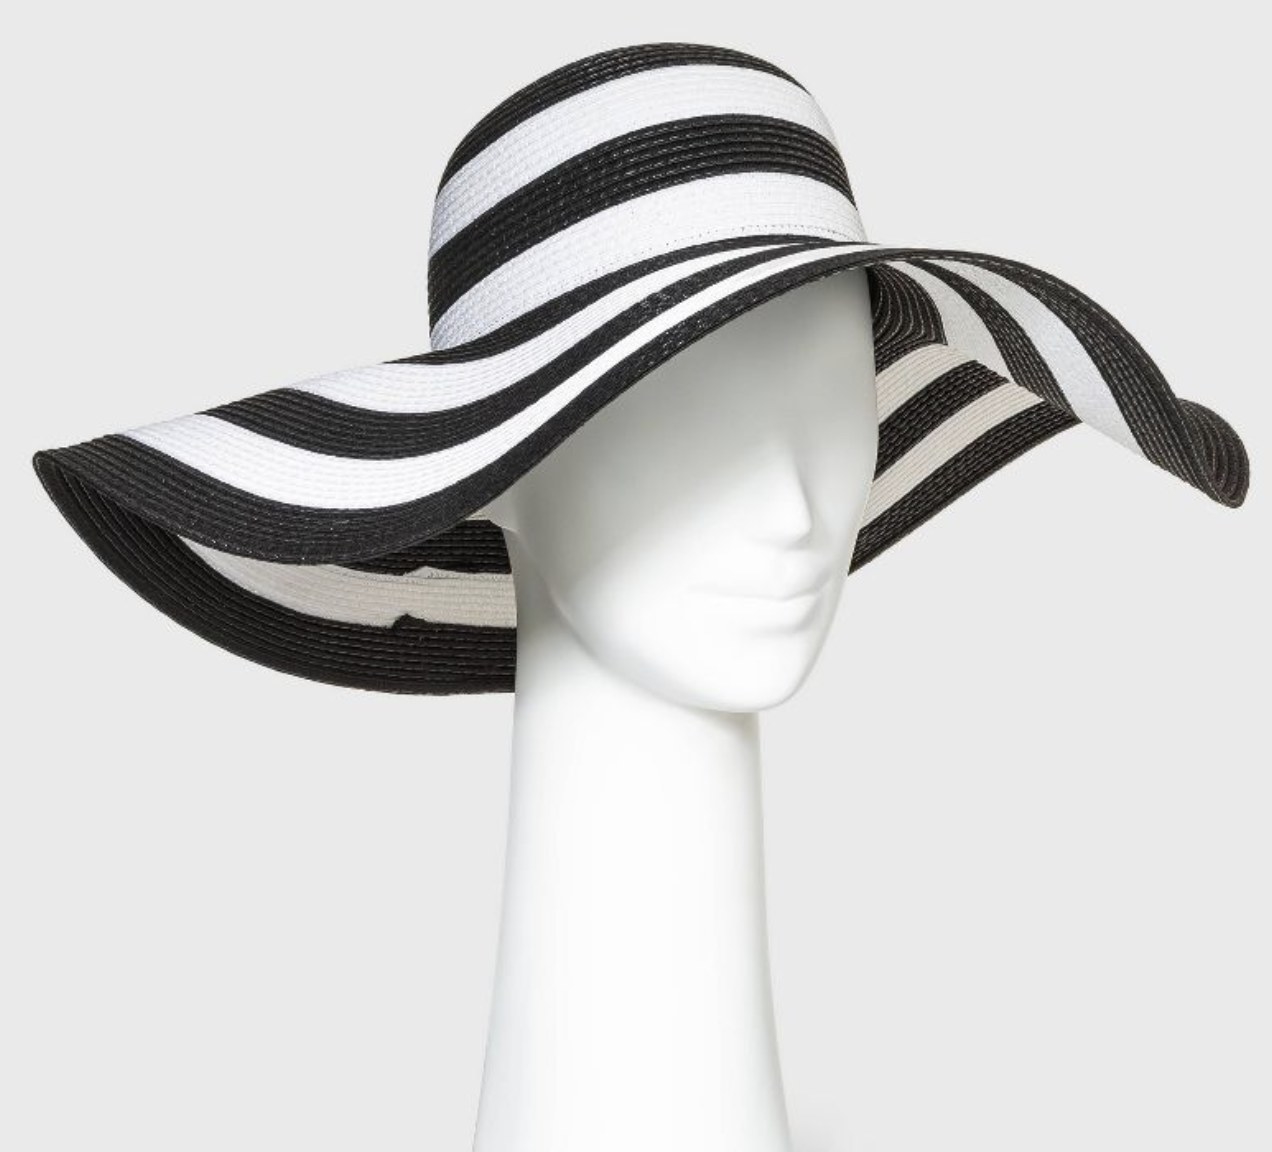 A black and white oversized sun hat